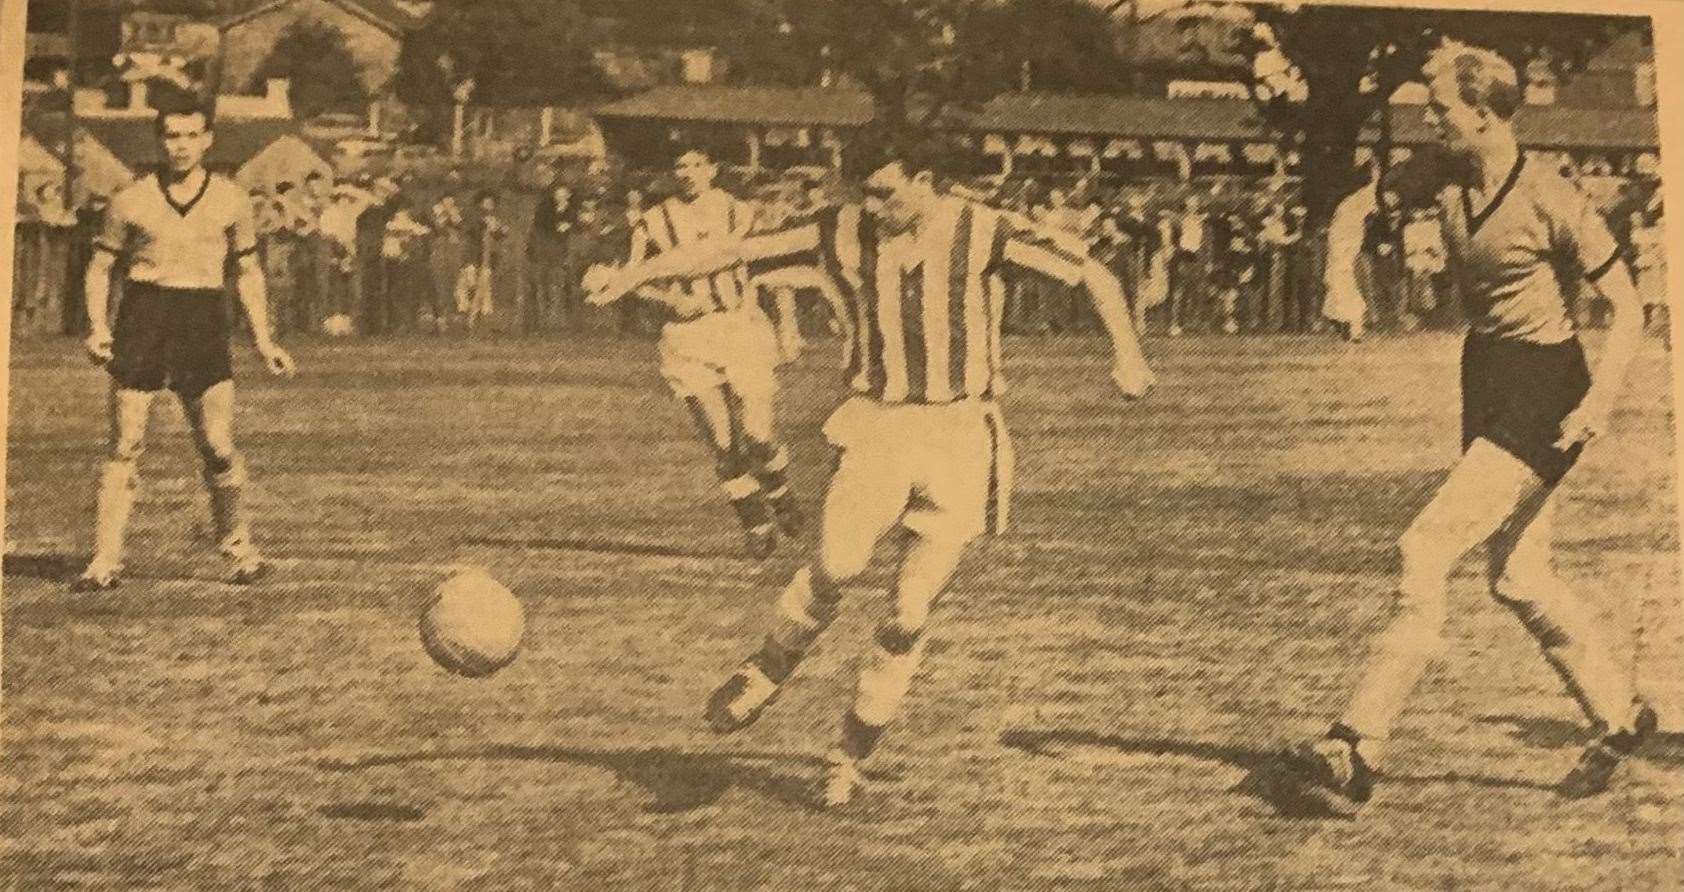 Tunbridge Wells United player Alan Back (in the striped jersey) in an attack on the Maidstone goal